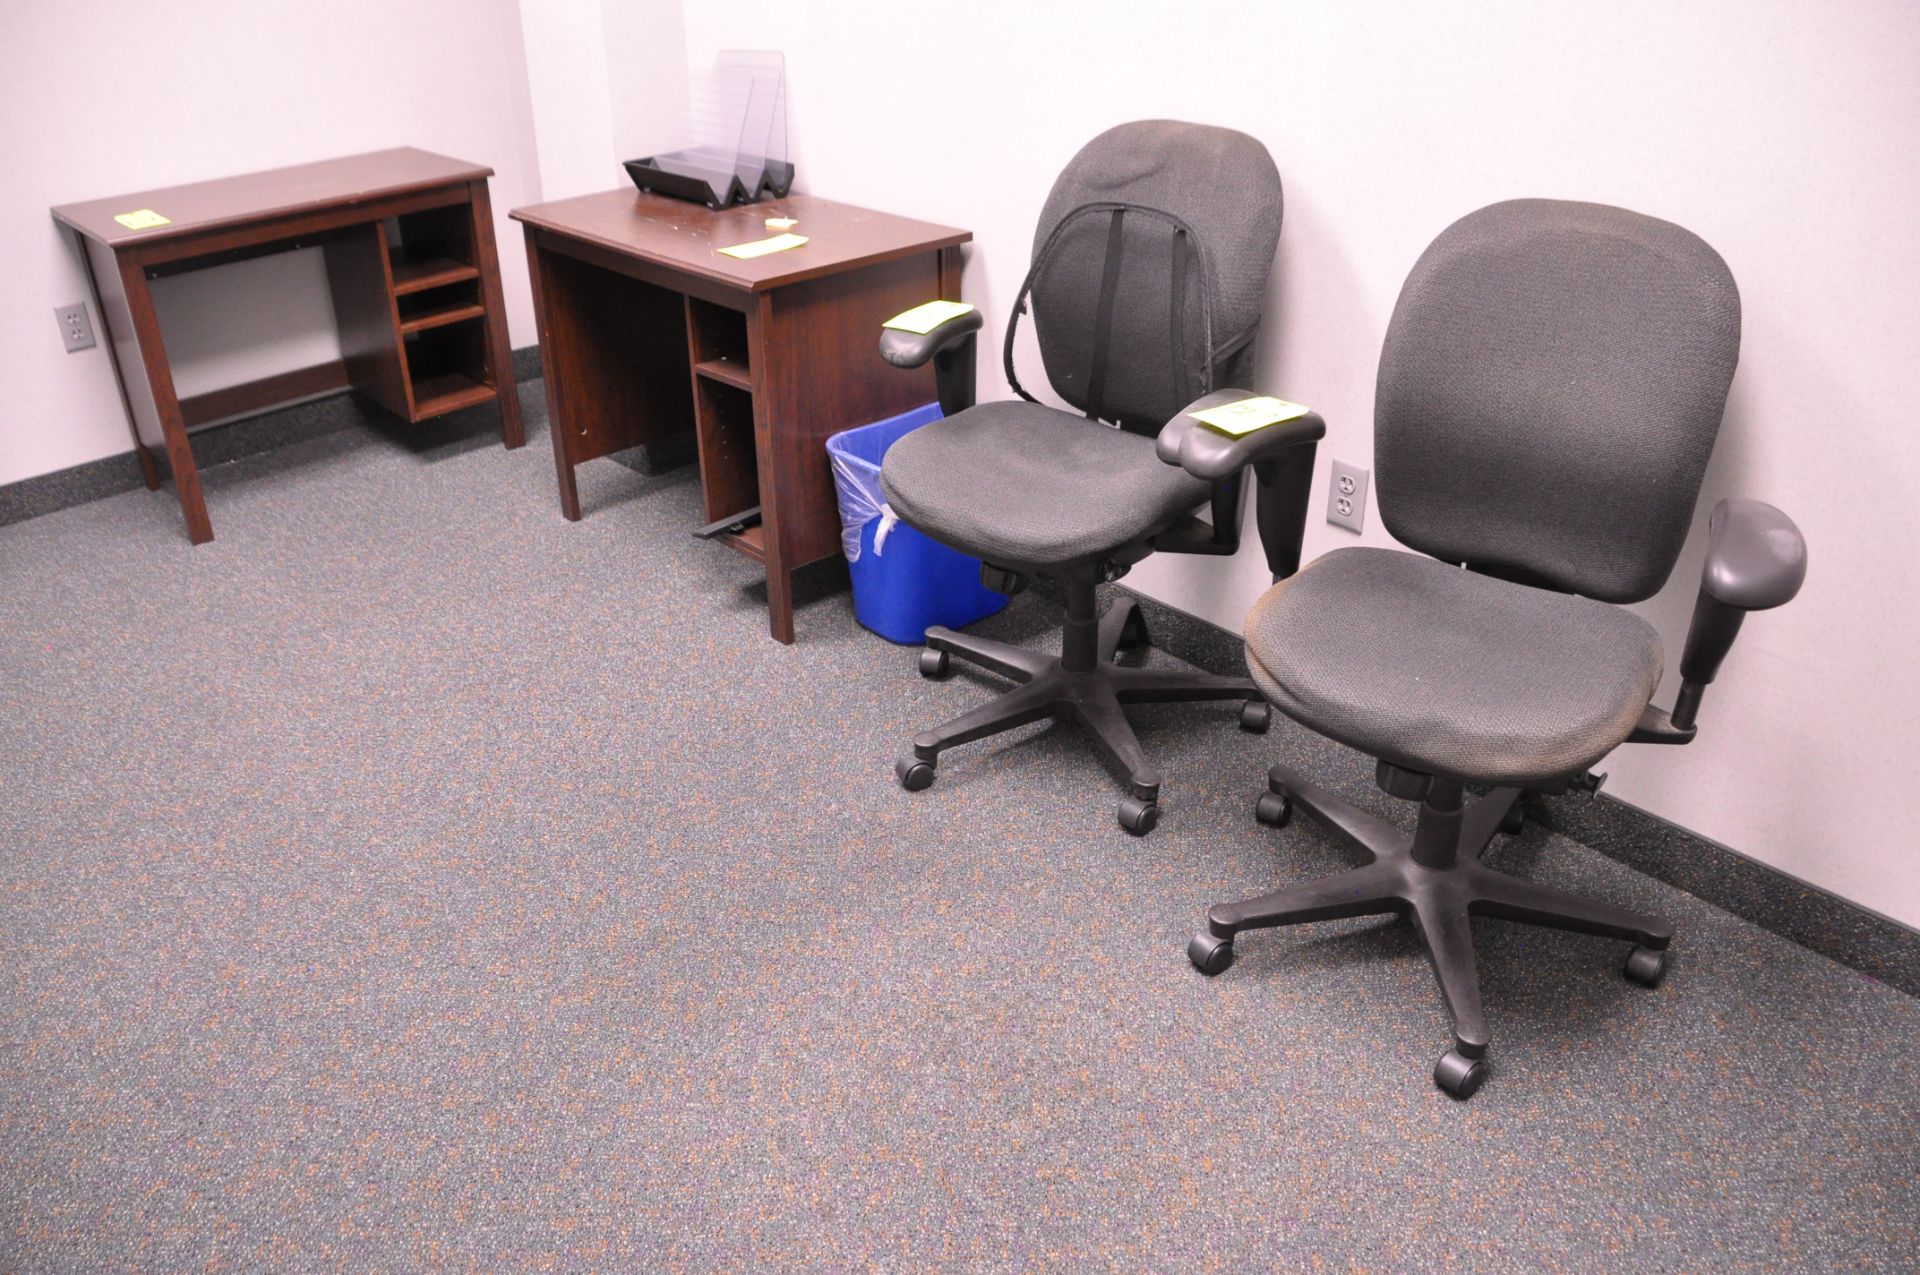 Lot-(2) Small Desks, and (2) Swivel Office Chairs in (1) Office, (Located 2nd Floor Offices)